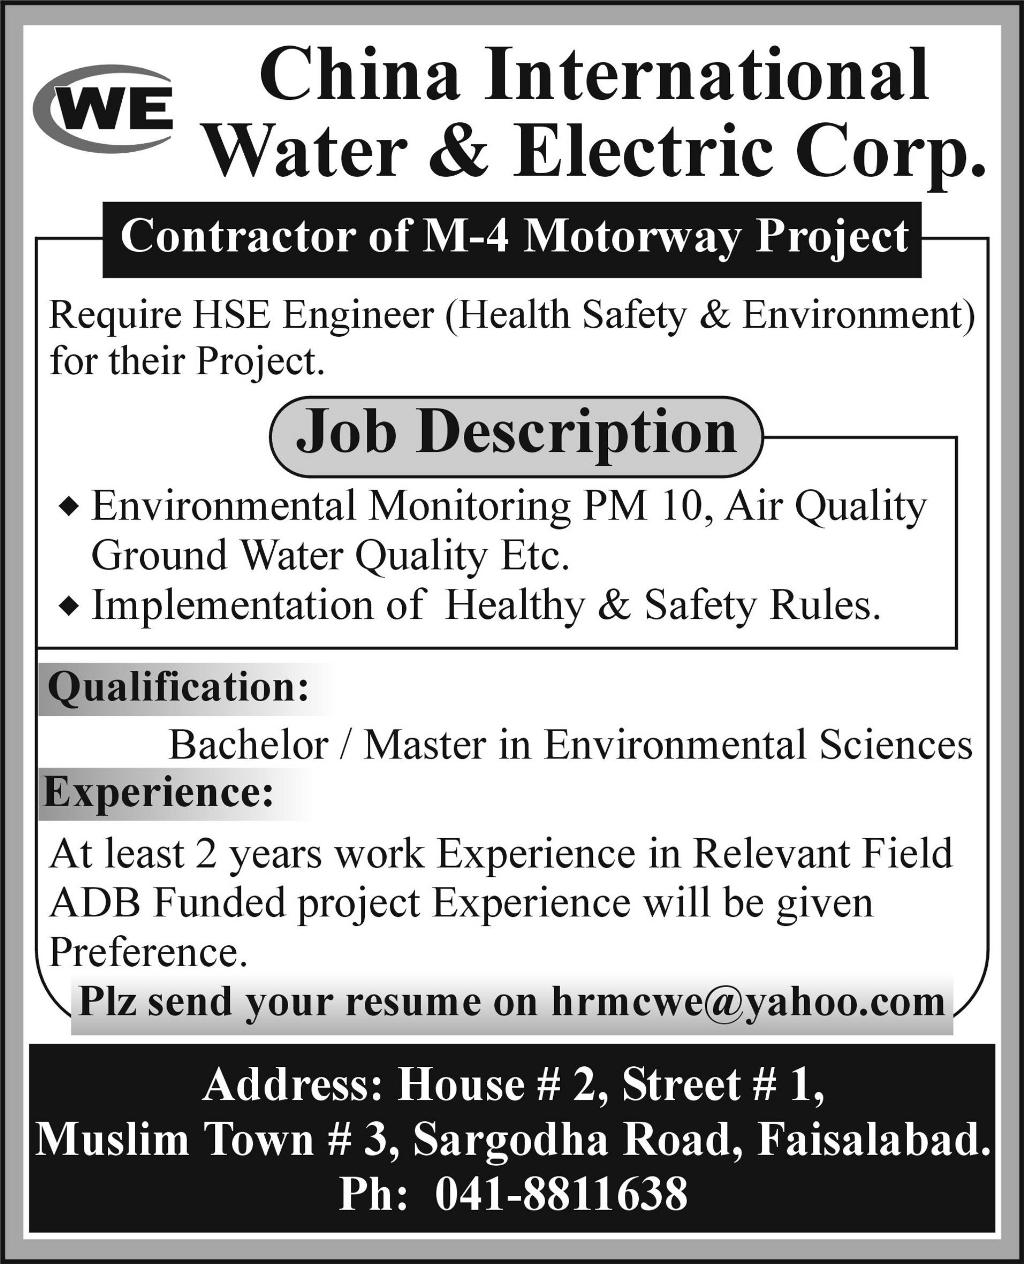 China International Water & Electric Corp. Required HSE Engineer